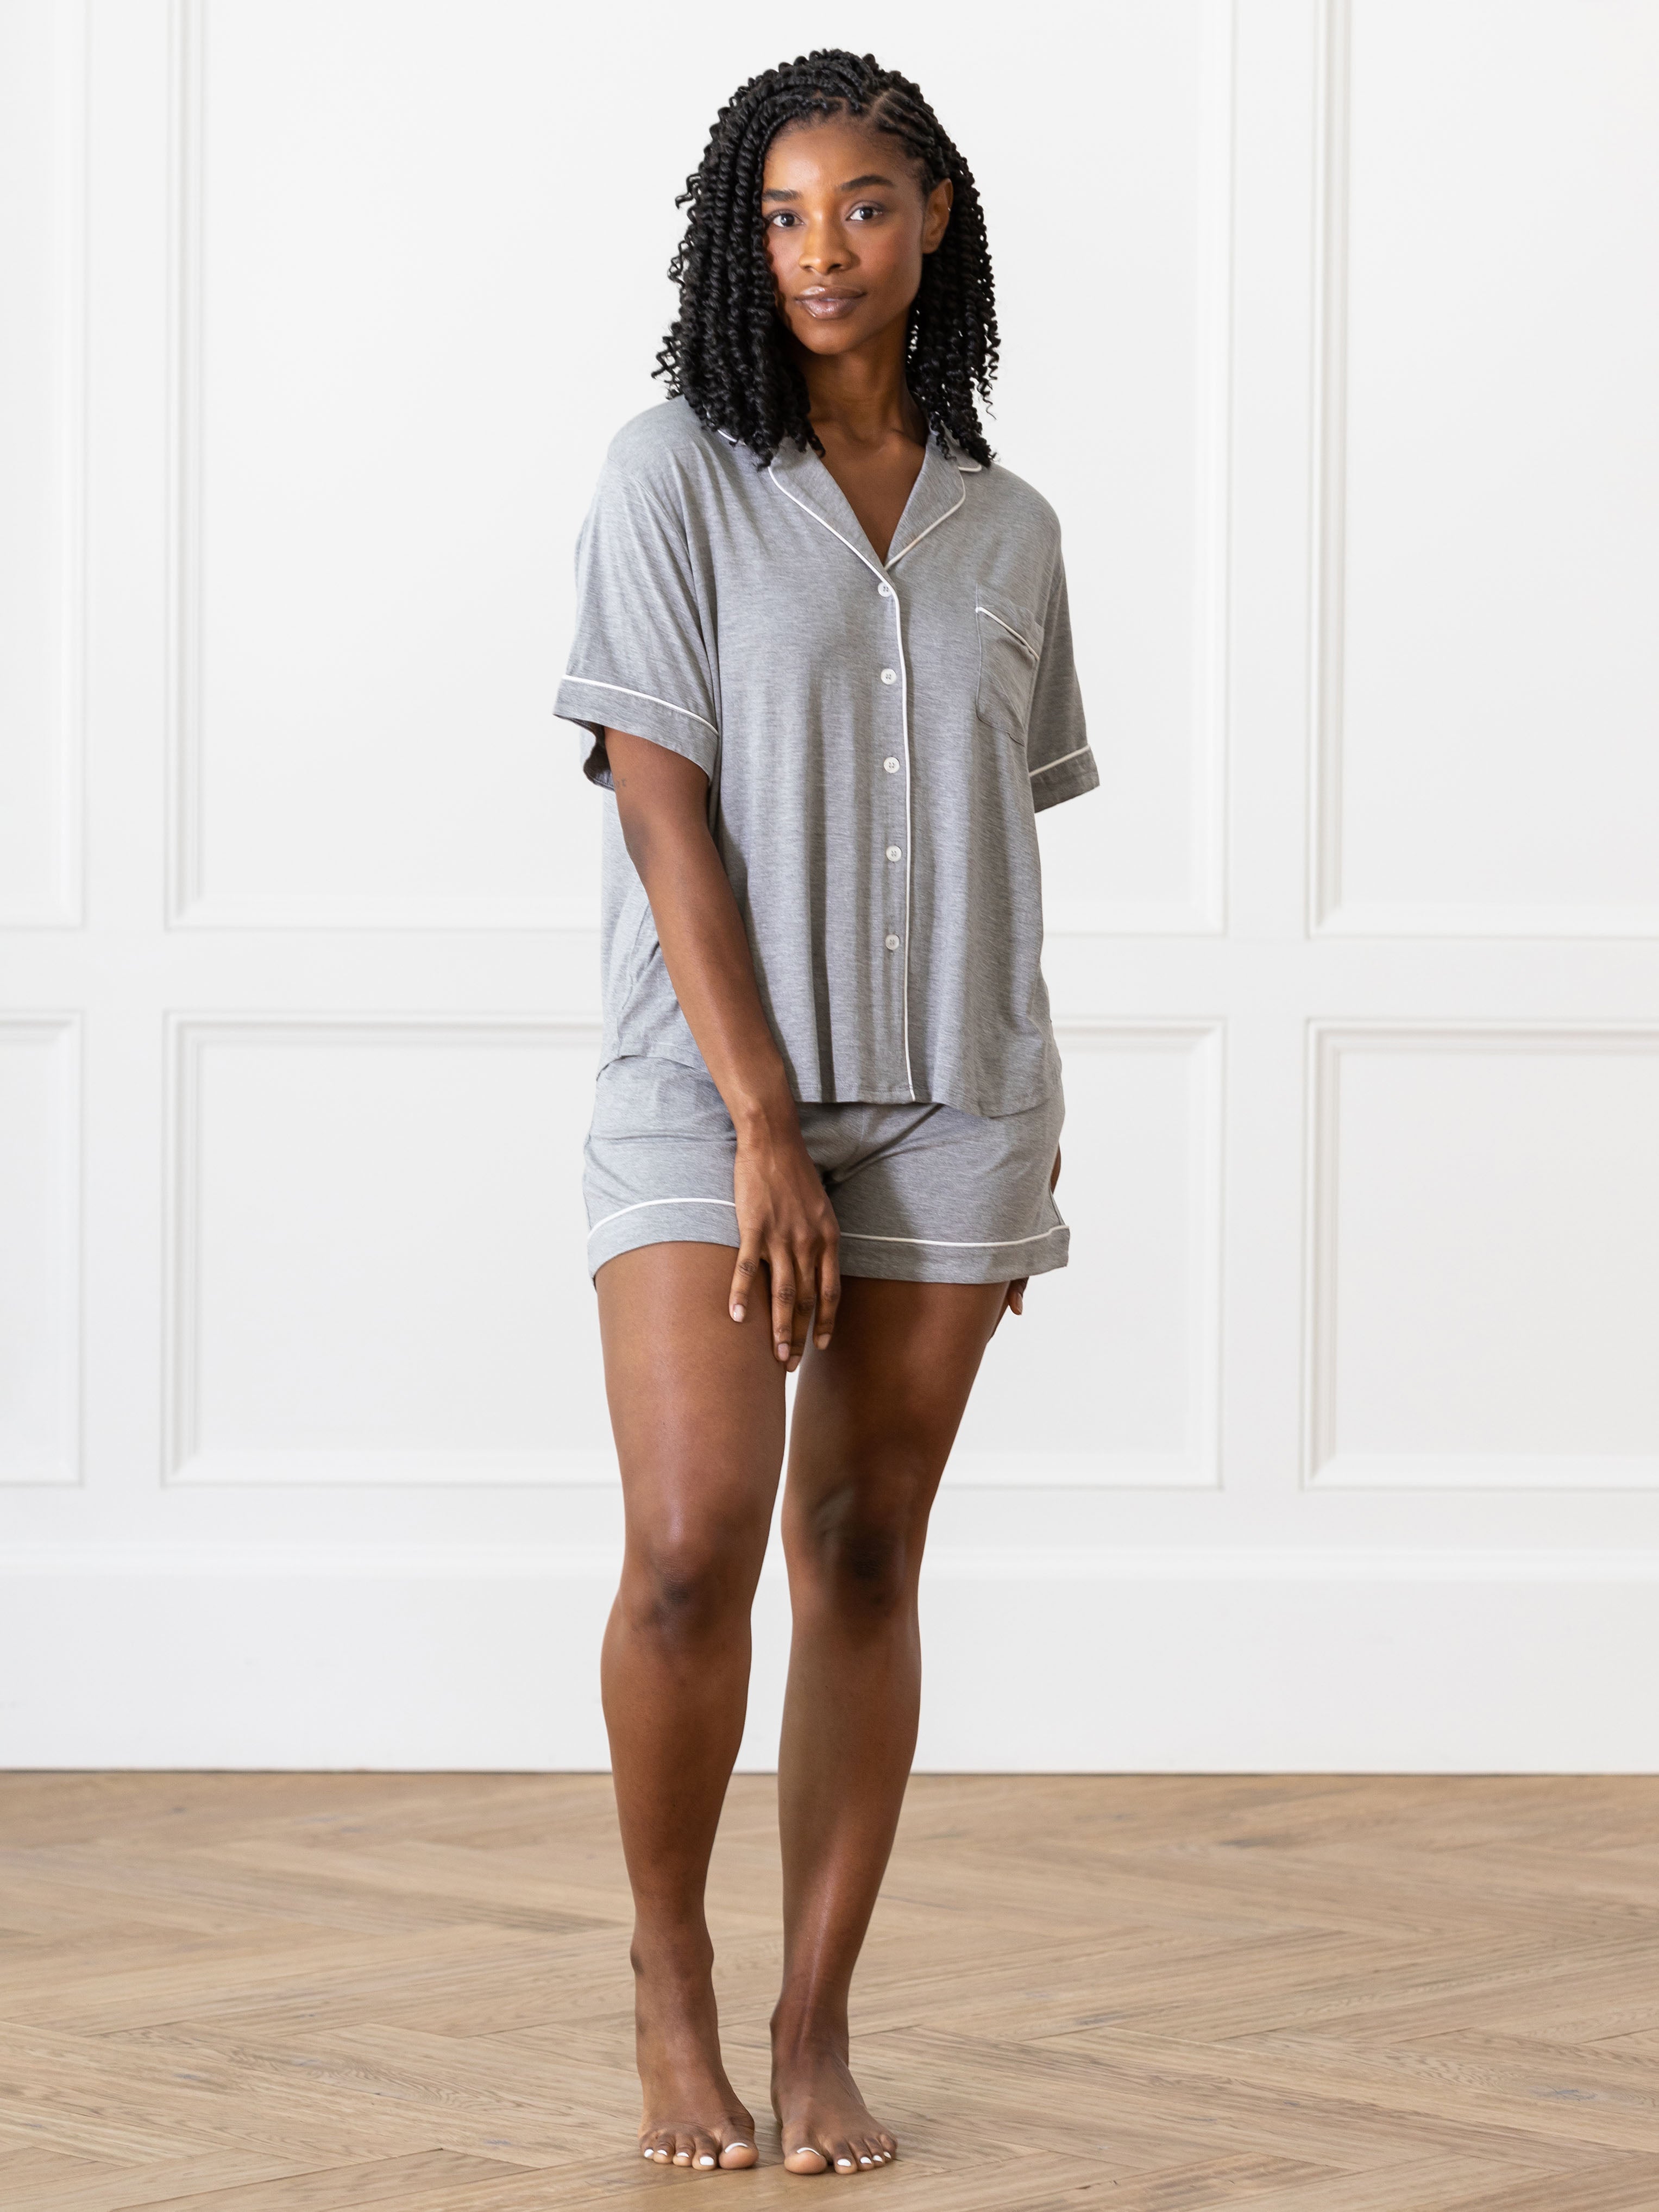 Grey Short Sleeve Pajama Set modeled by a woman. The photo was taken in a light setting, showing off the colors and lines of the pajamas. |Color:Grey